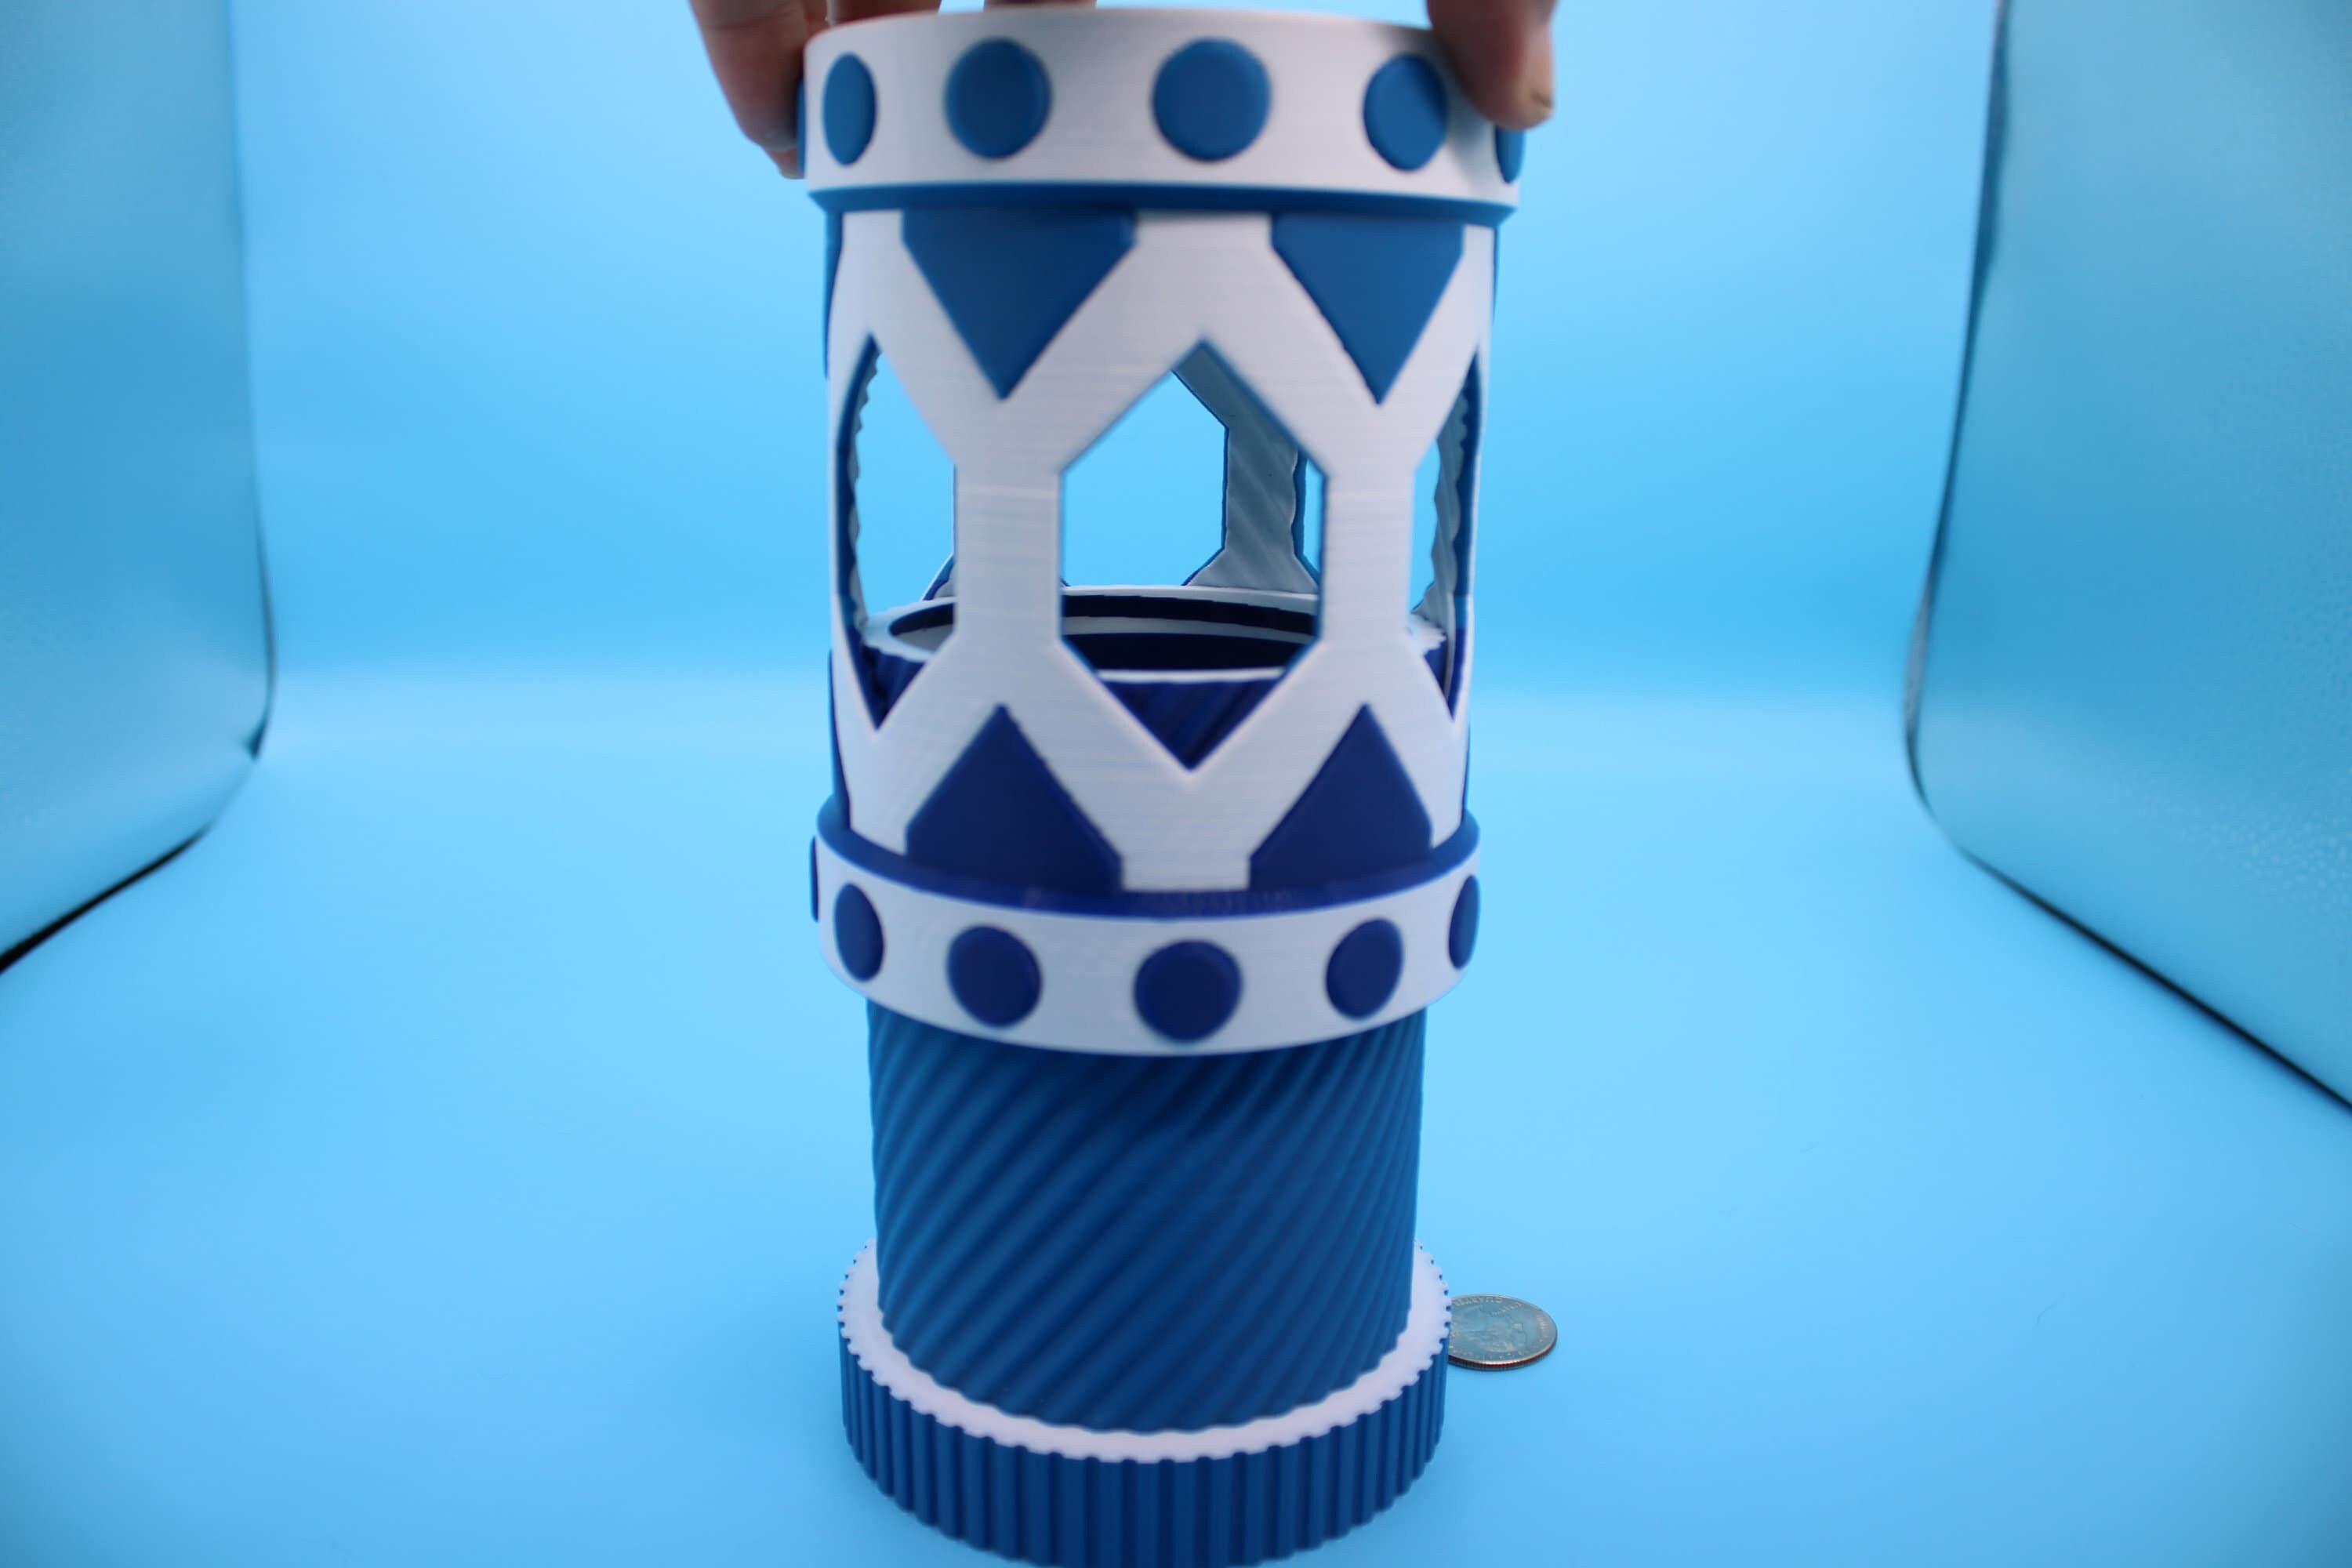 Twist to lock storage container. Multi Blue and White. 3D Printed. Stash your favorite trinkets, cash, and more., Looks Amazing on display.